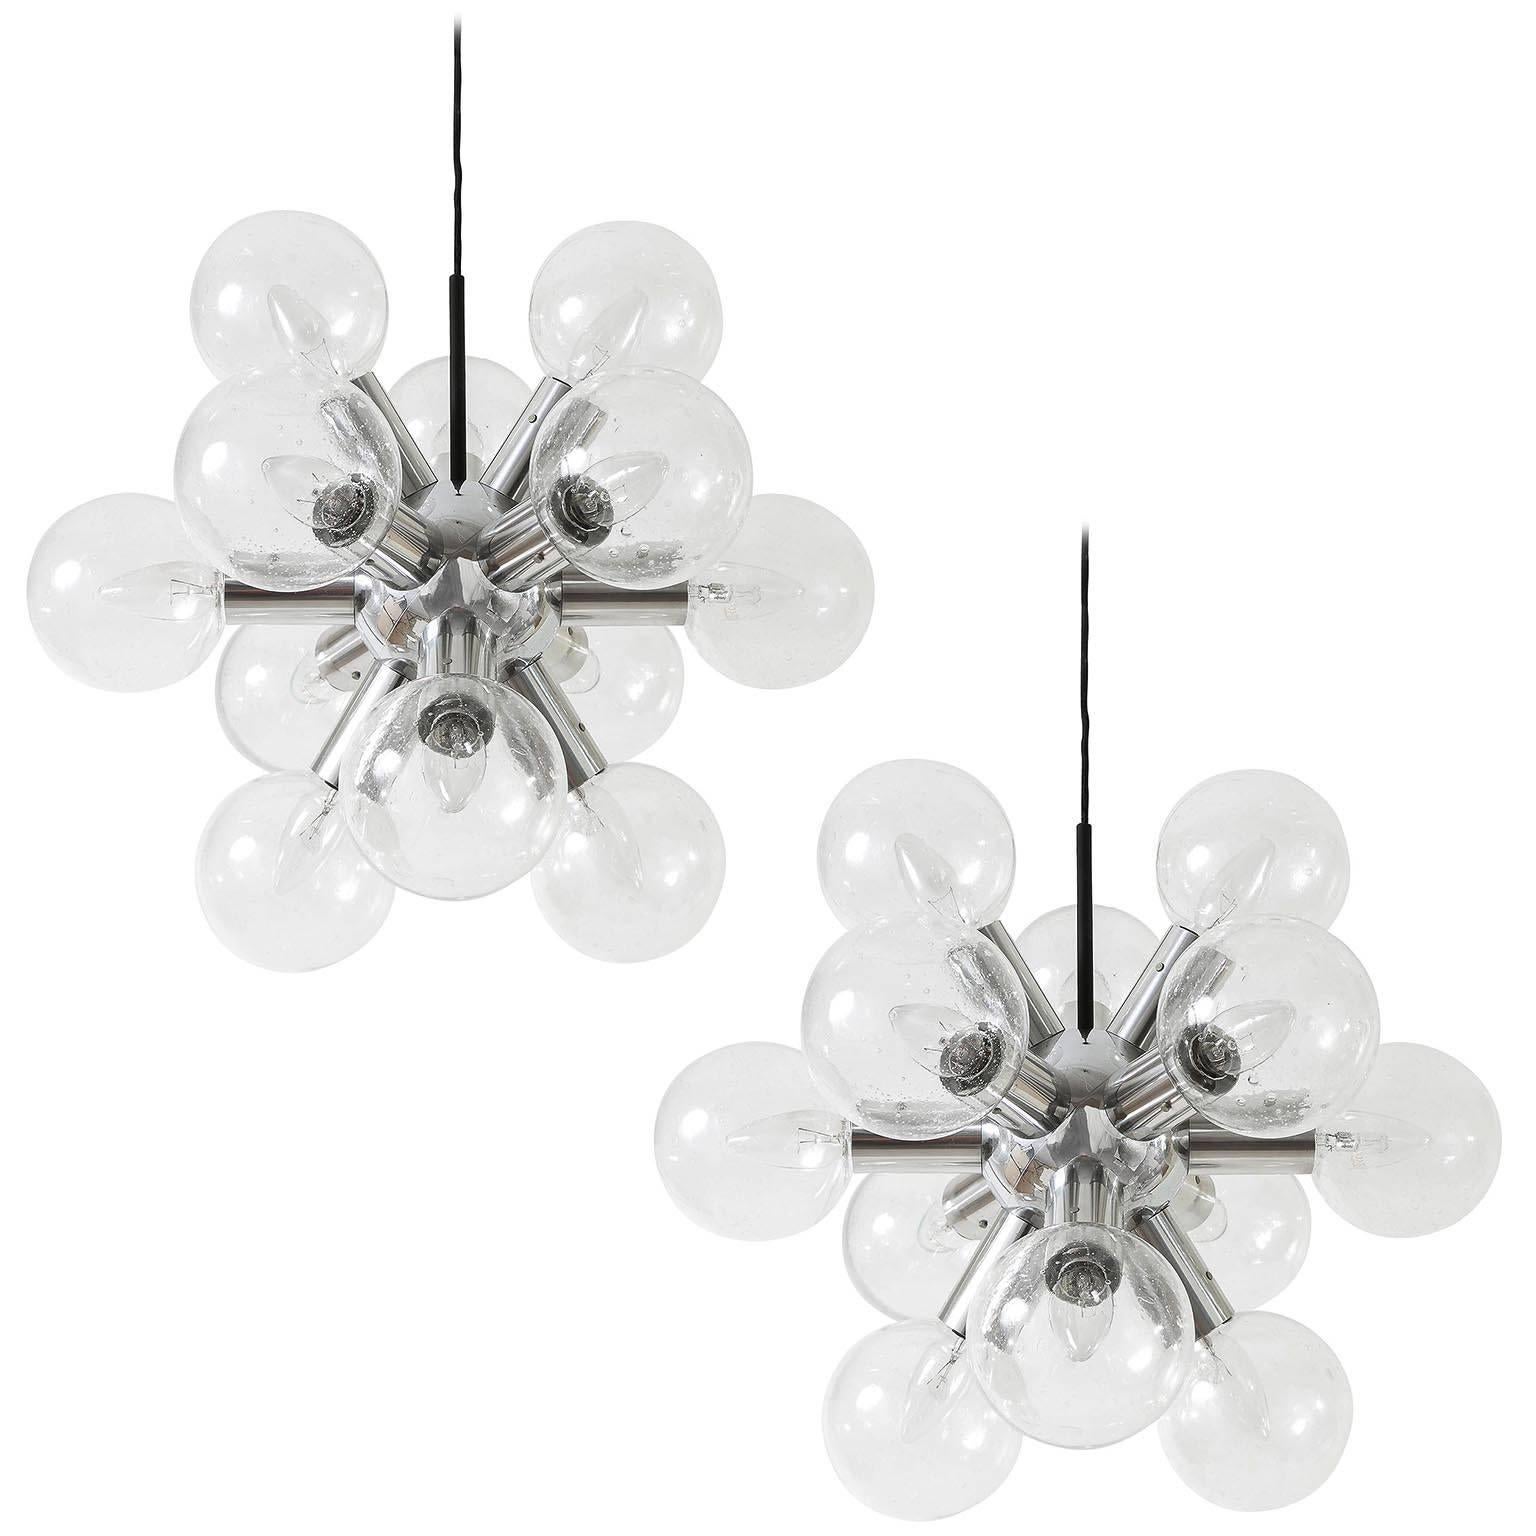 One of two fantastic 12-arm atomic chandeliers / pendant lights model 